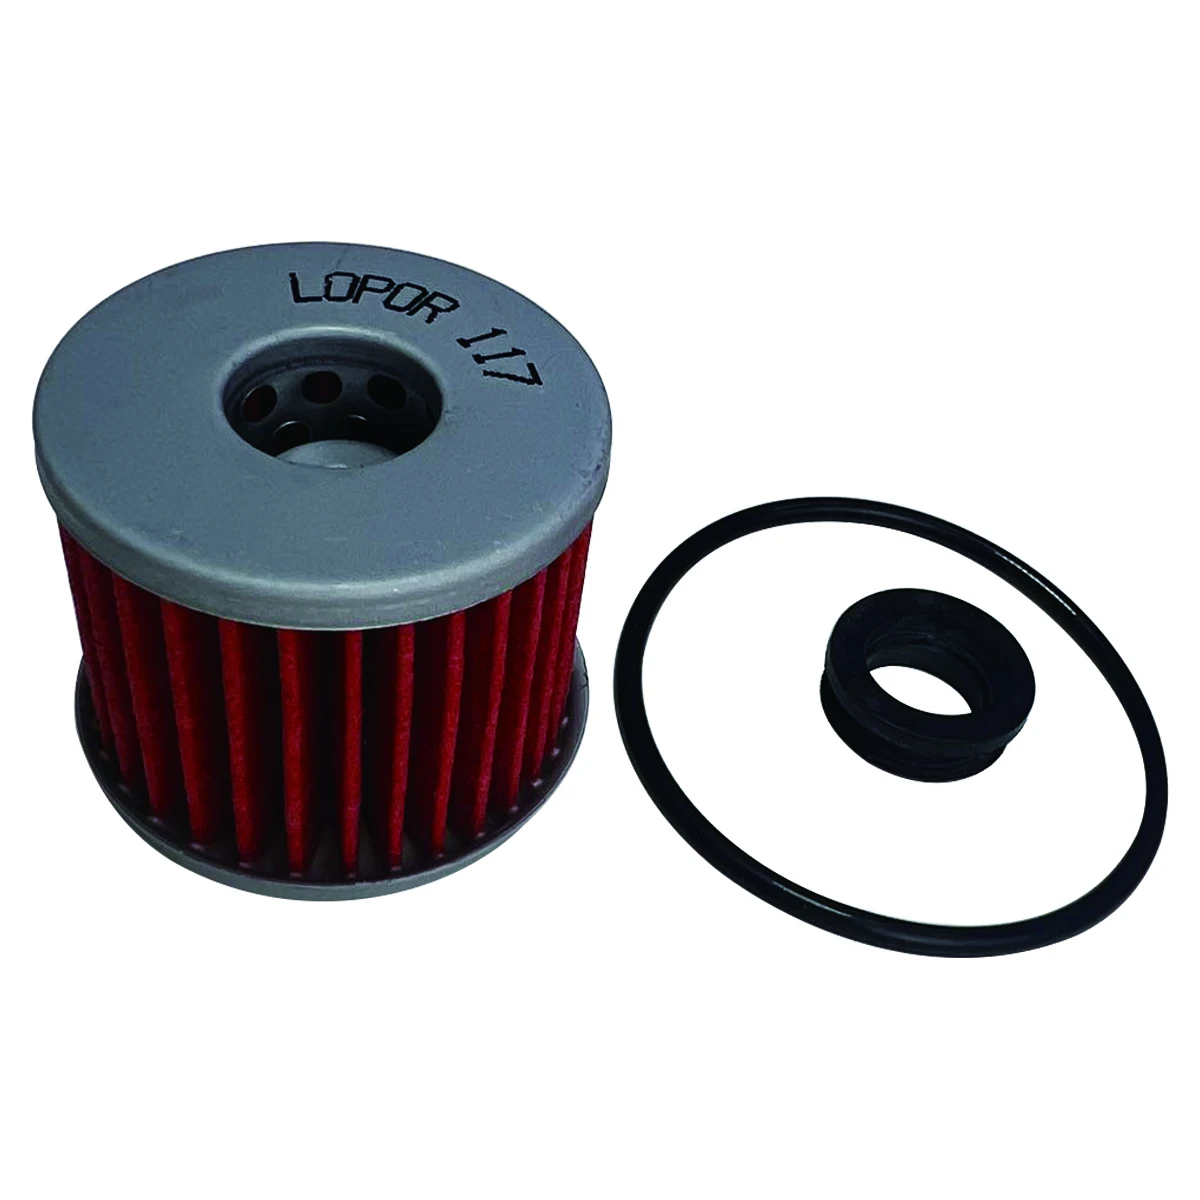 Motorcycle Oil Filter For Honda Scooter C125 A Super Cub 700 Integra NSS750 M - $21.47+